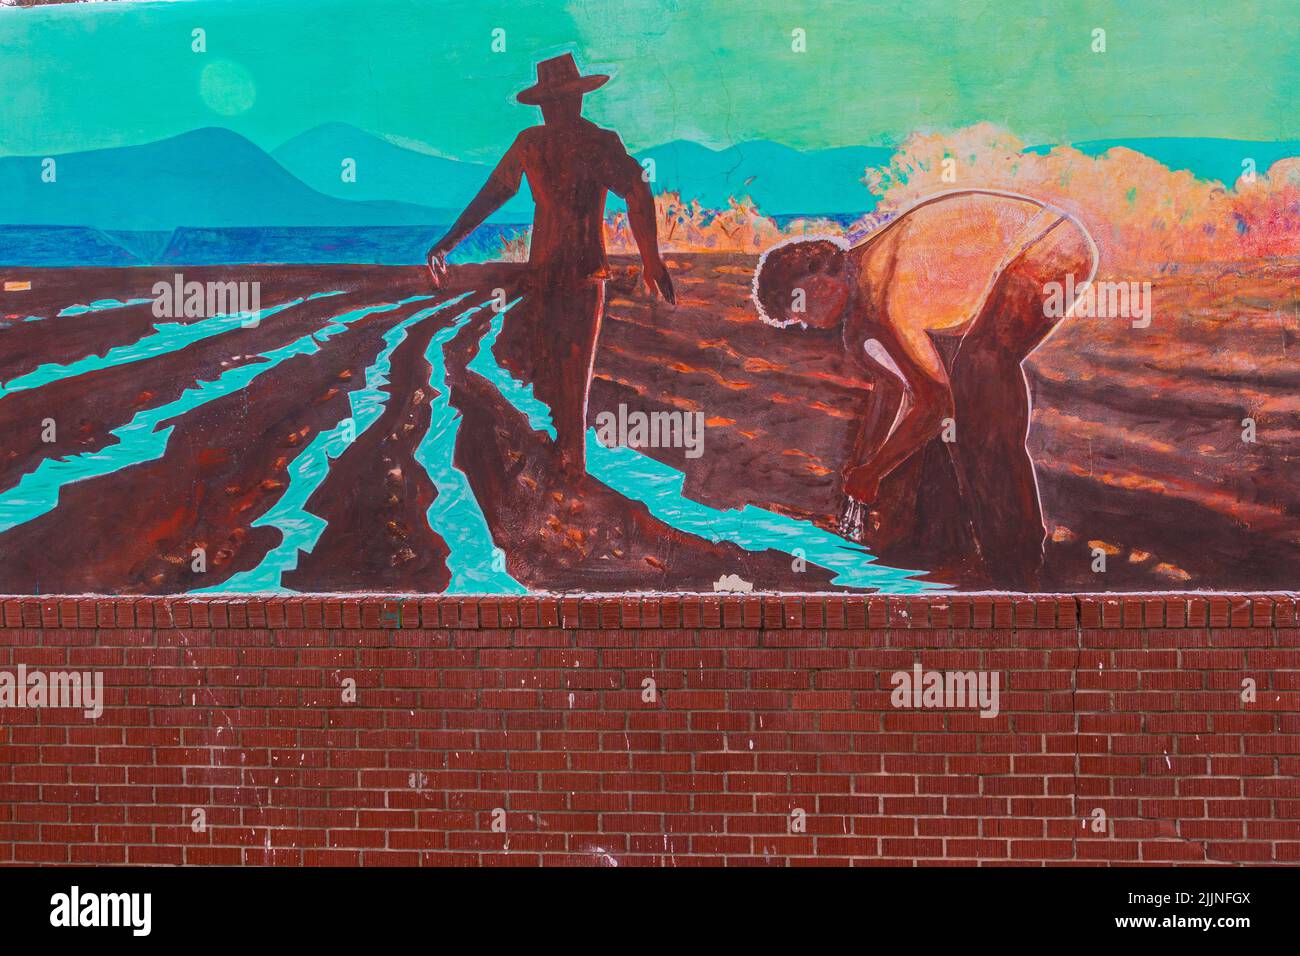 Mural Depicting Early Farming Life Painted on Adobe Wall, Espanola, New Mexico, USA Stock Photo